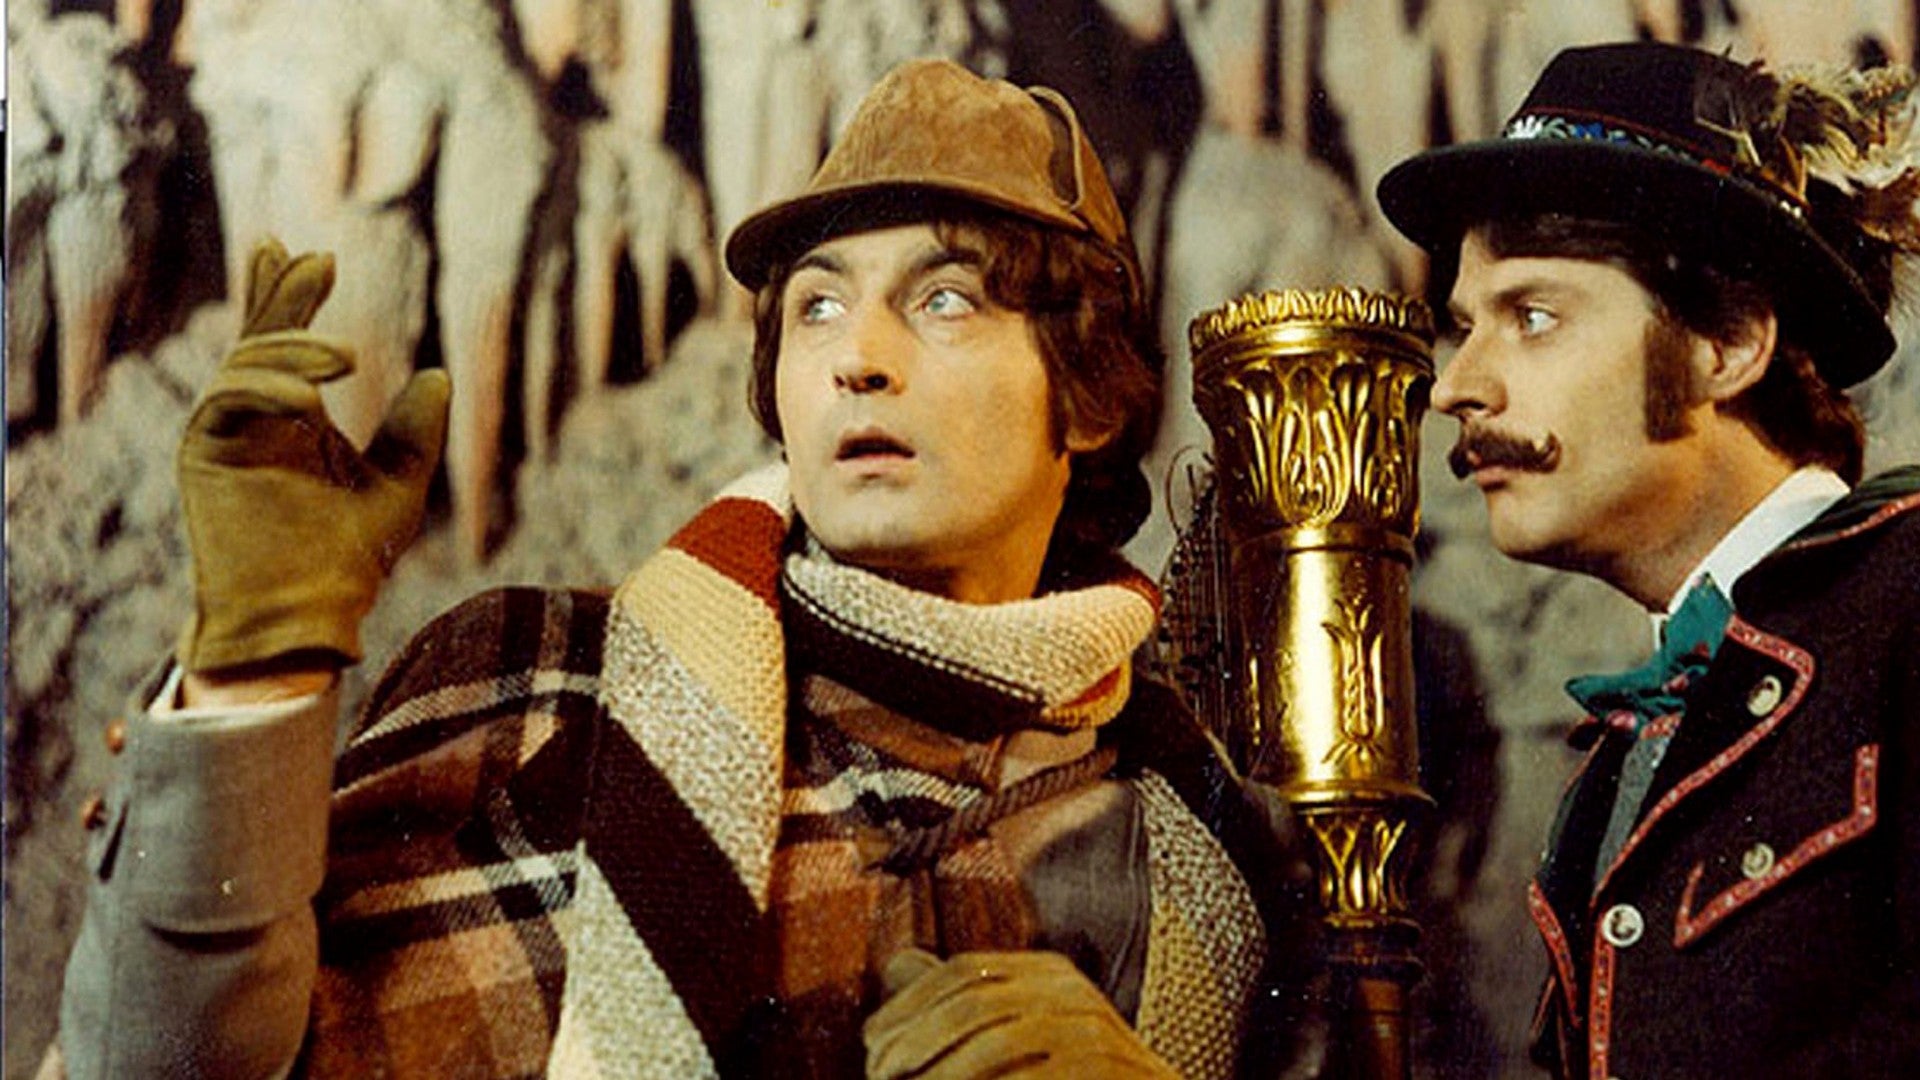 The Mysterious Castle in the Carpathians: A Classic Blend of Comedy and Sci-Fi